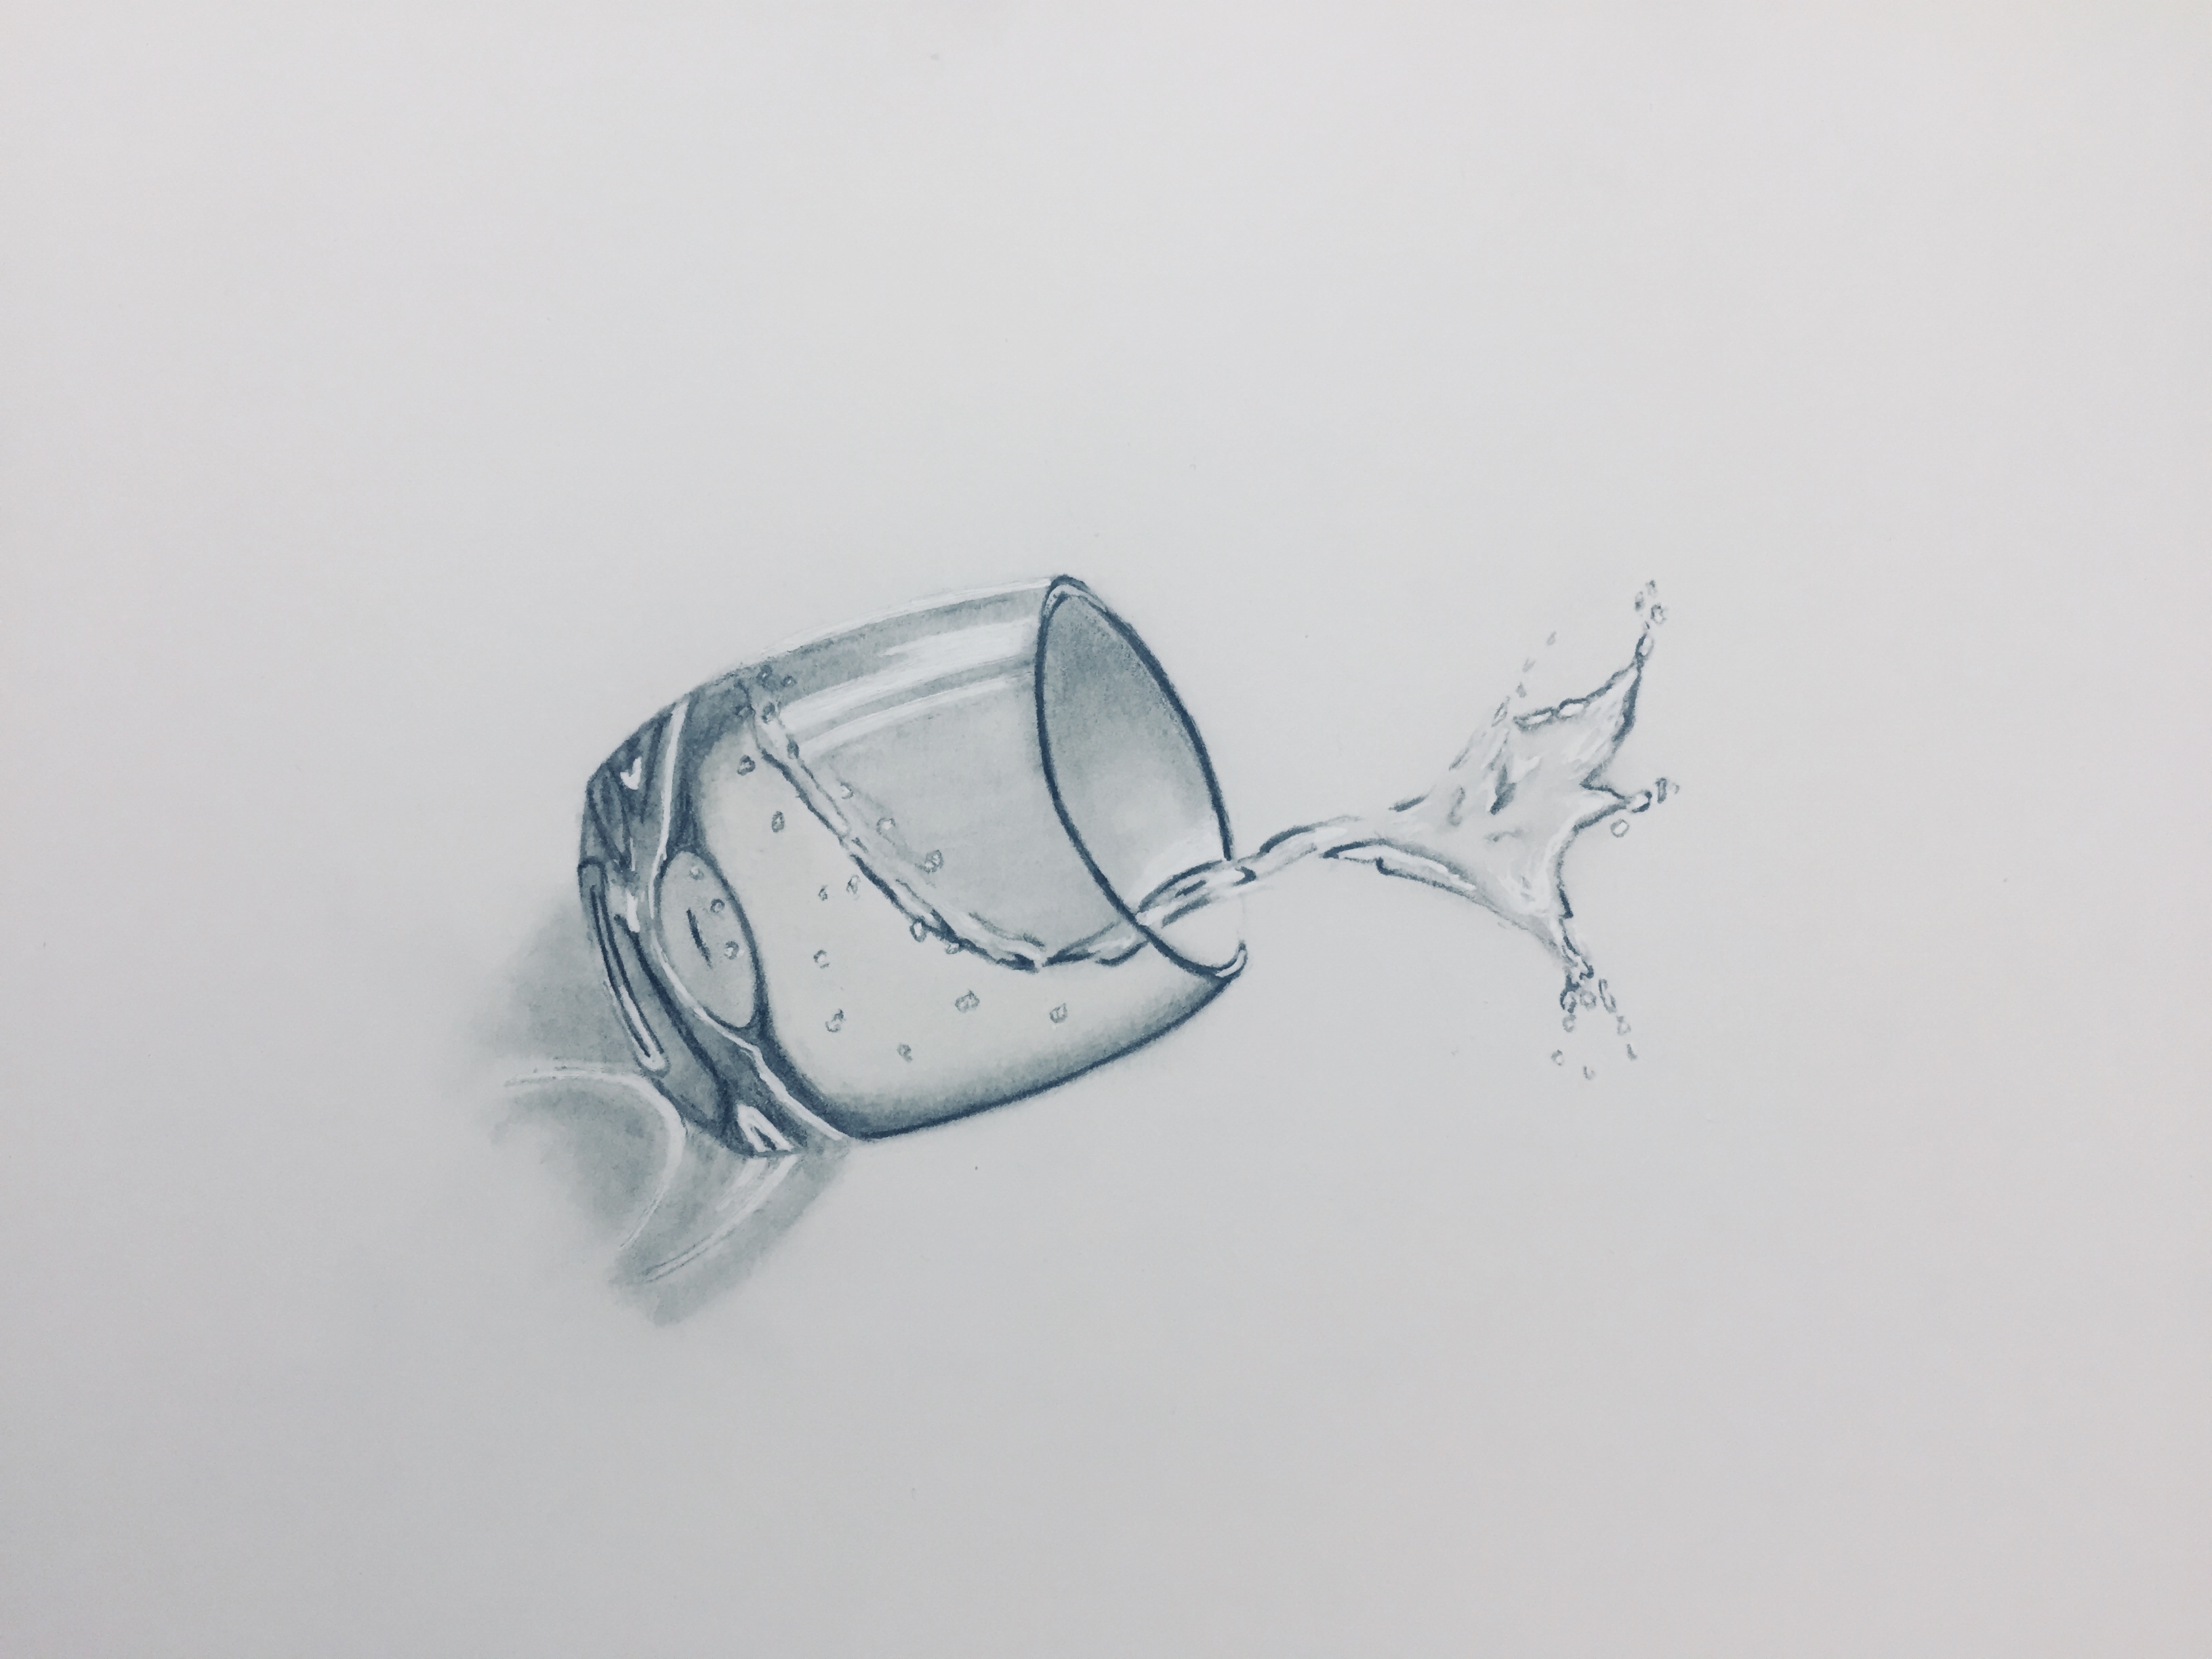 How To Draw Glass And Transparent Objects  Learn More  Bored Art   Realistic pencil drawings Still life drawing Object drawing